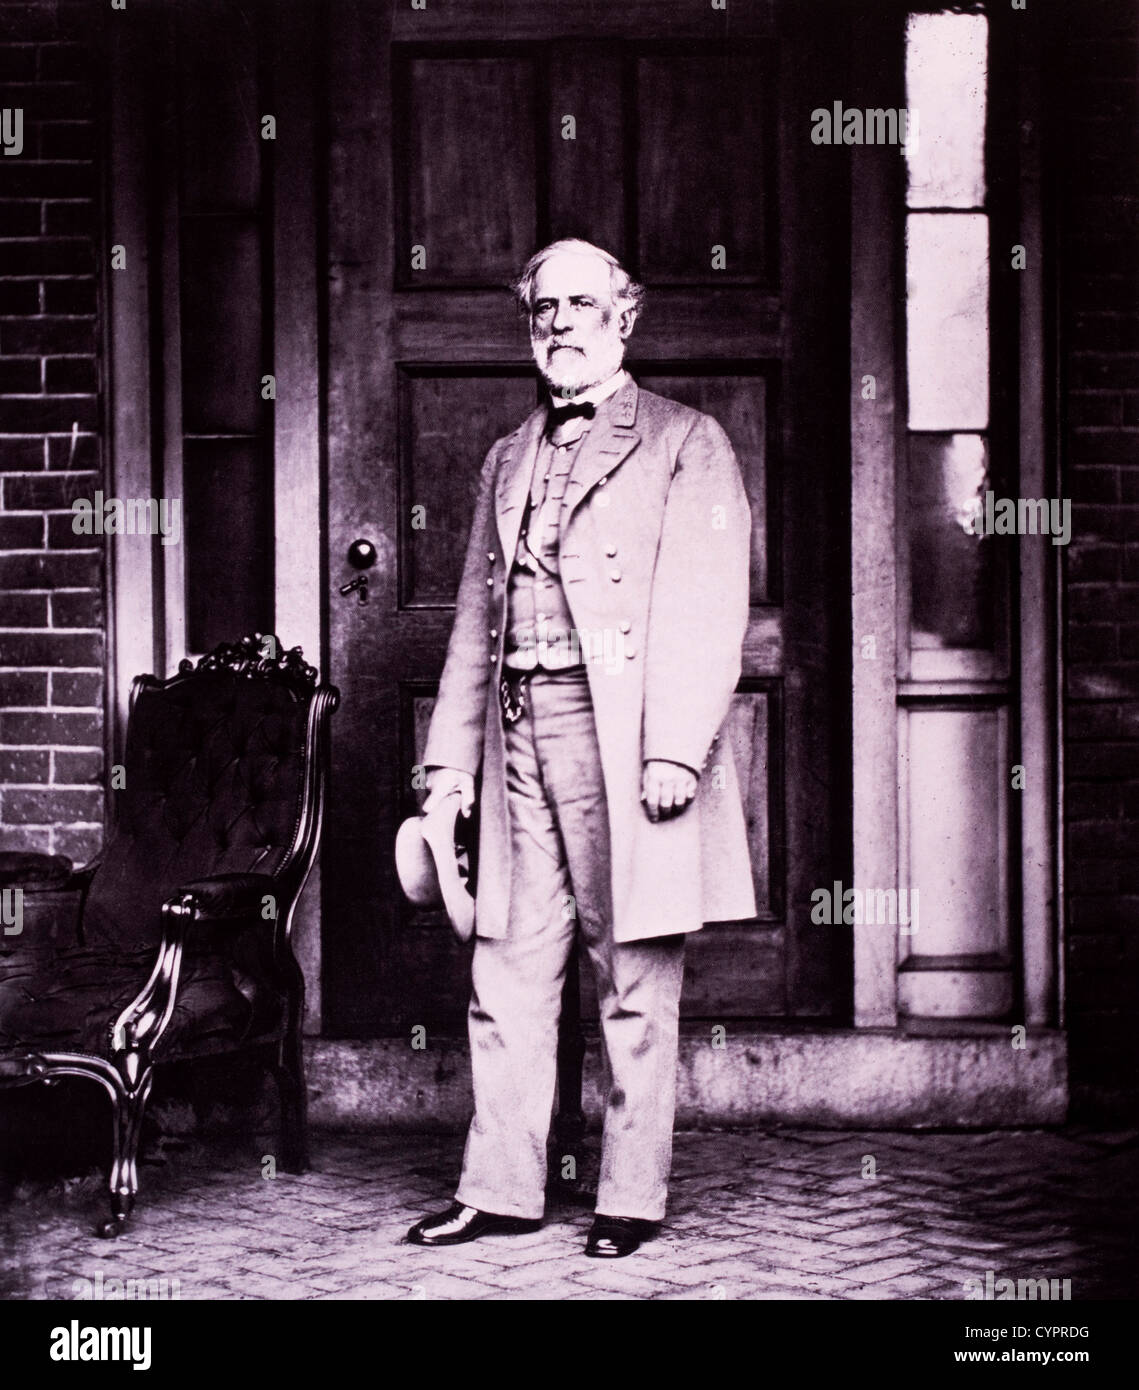 Robert E. Lee (1807-1870), General in Chief of the Confederate Armies, Photograph, 1865, by Mathew Brady at Lee's Home in Richmond, Virginia, USA Stock Photo